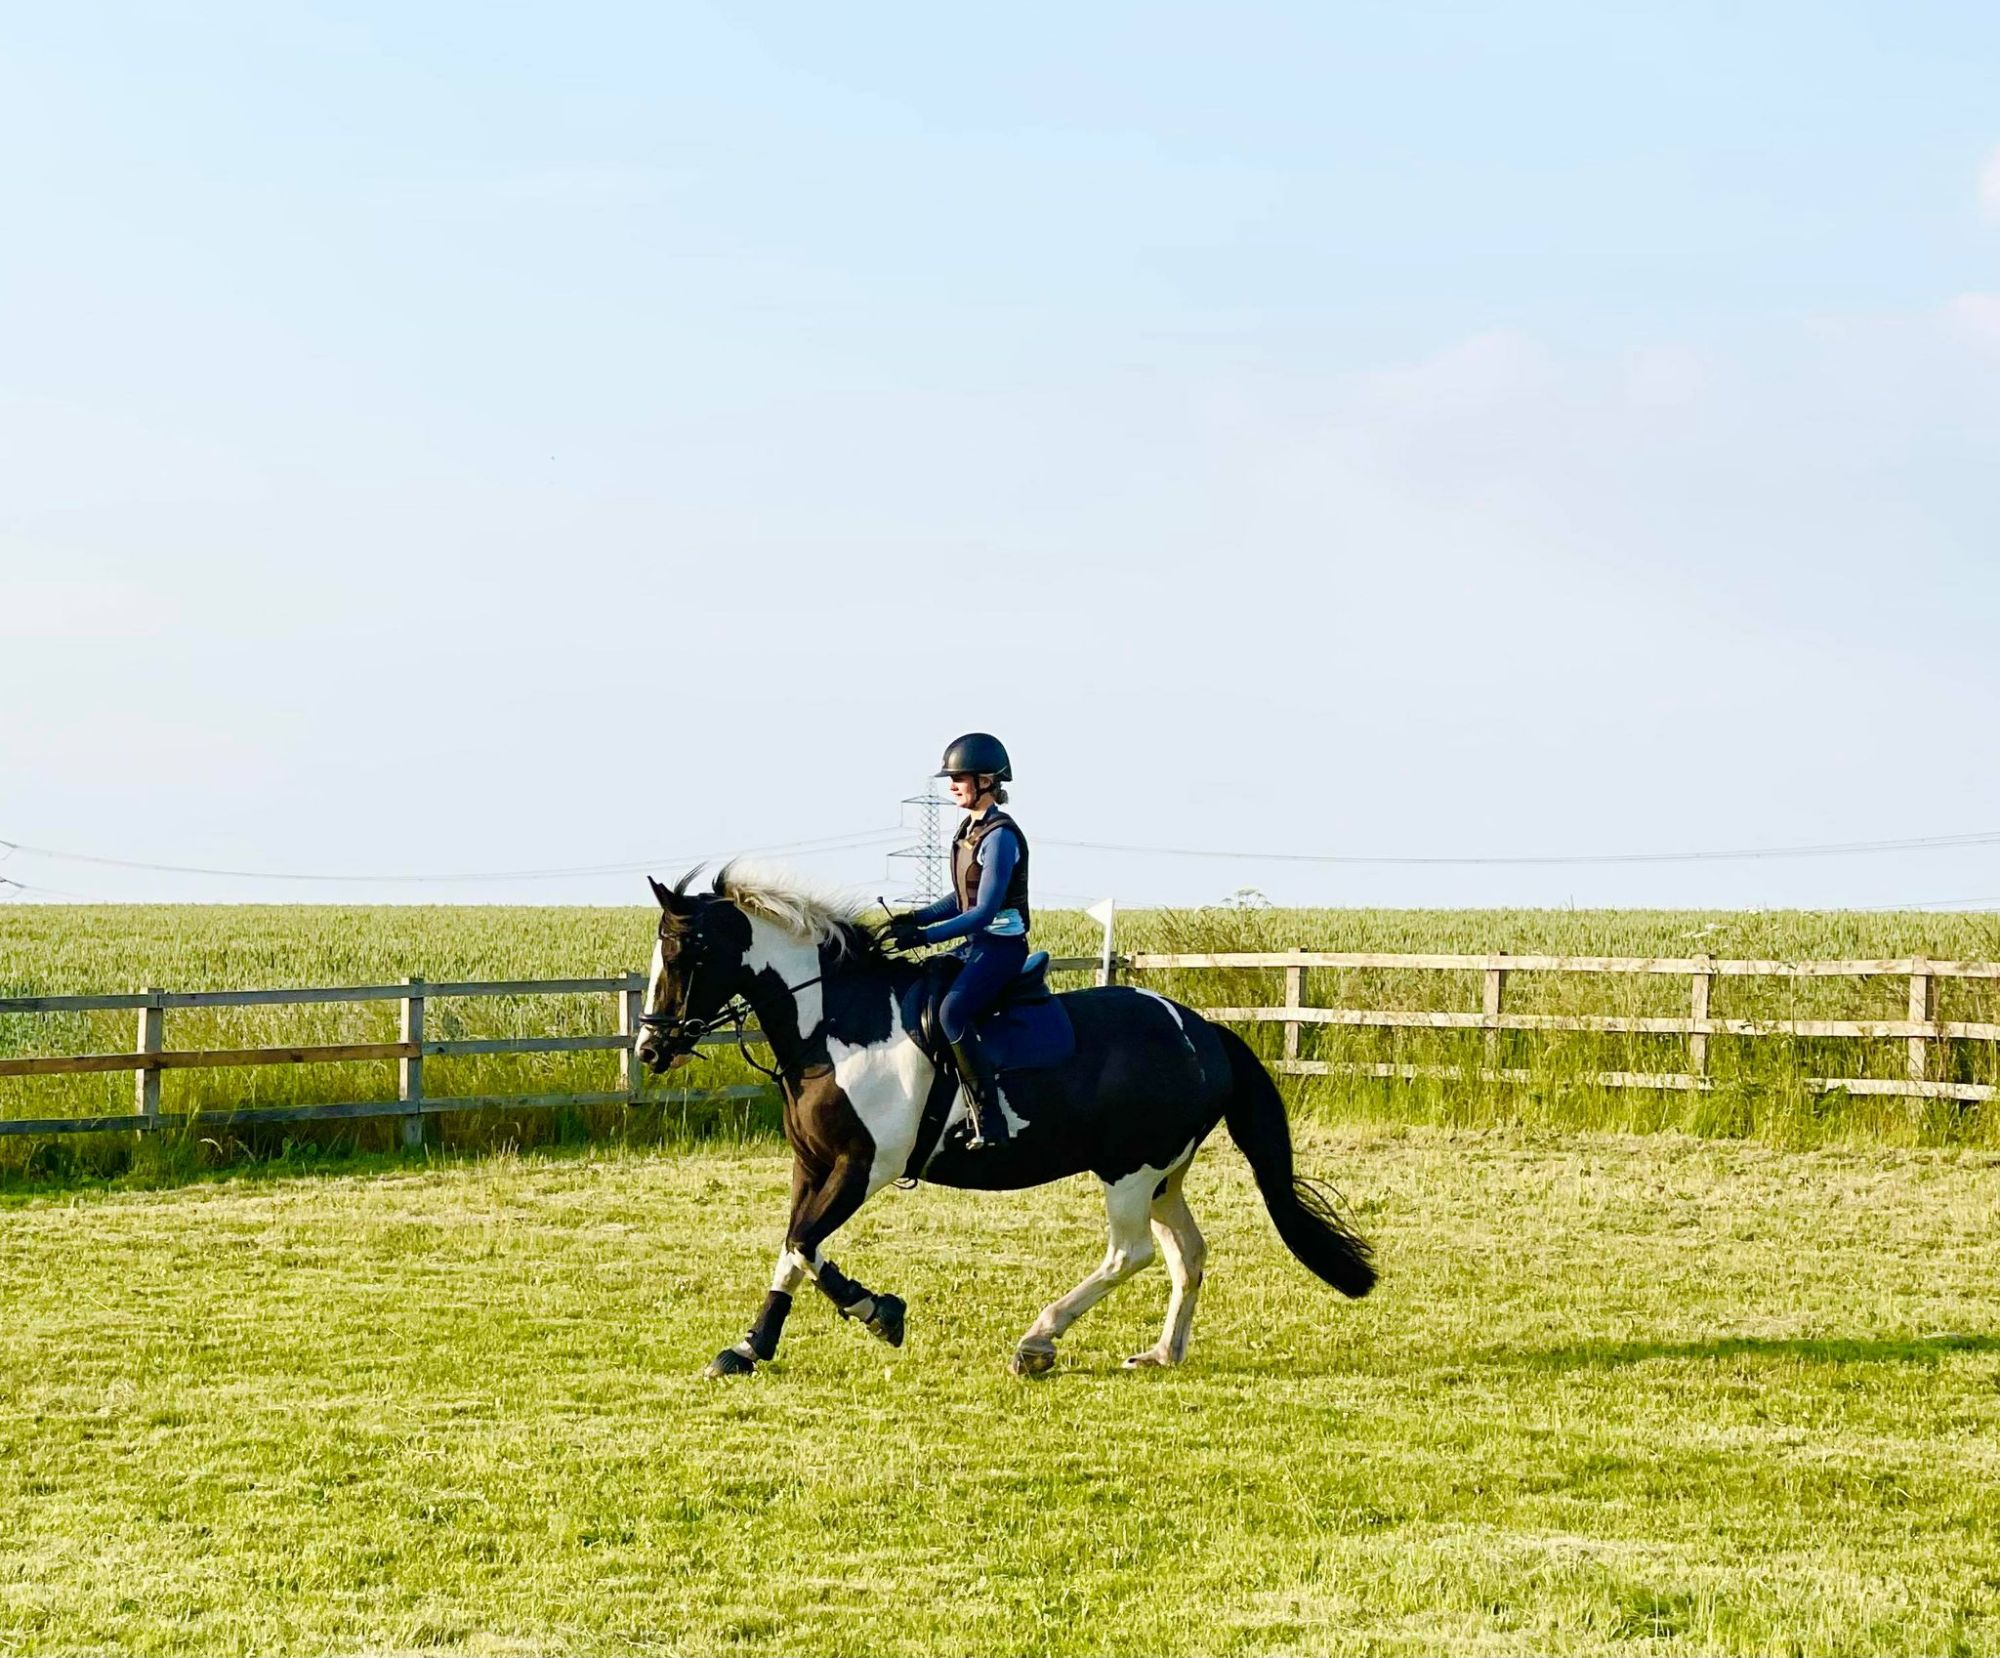 Equestrian and Equine Planning Applications - Architectural Design & Advice